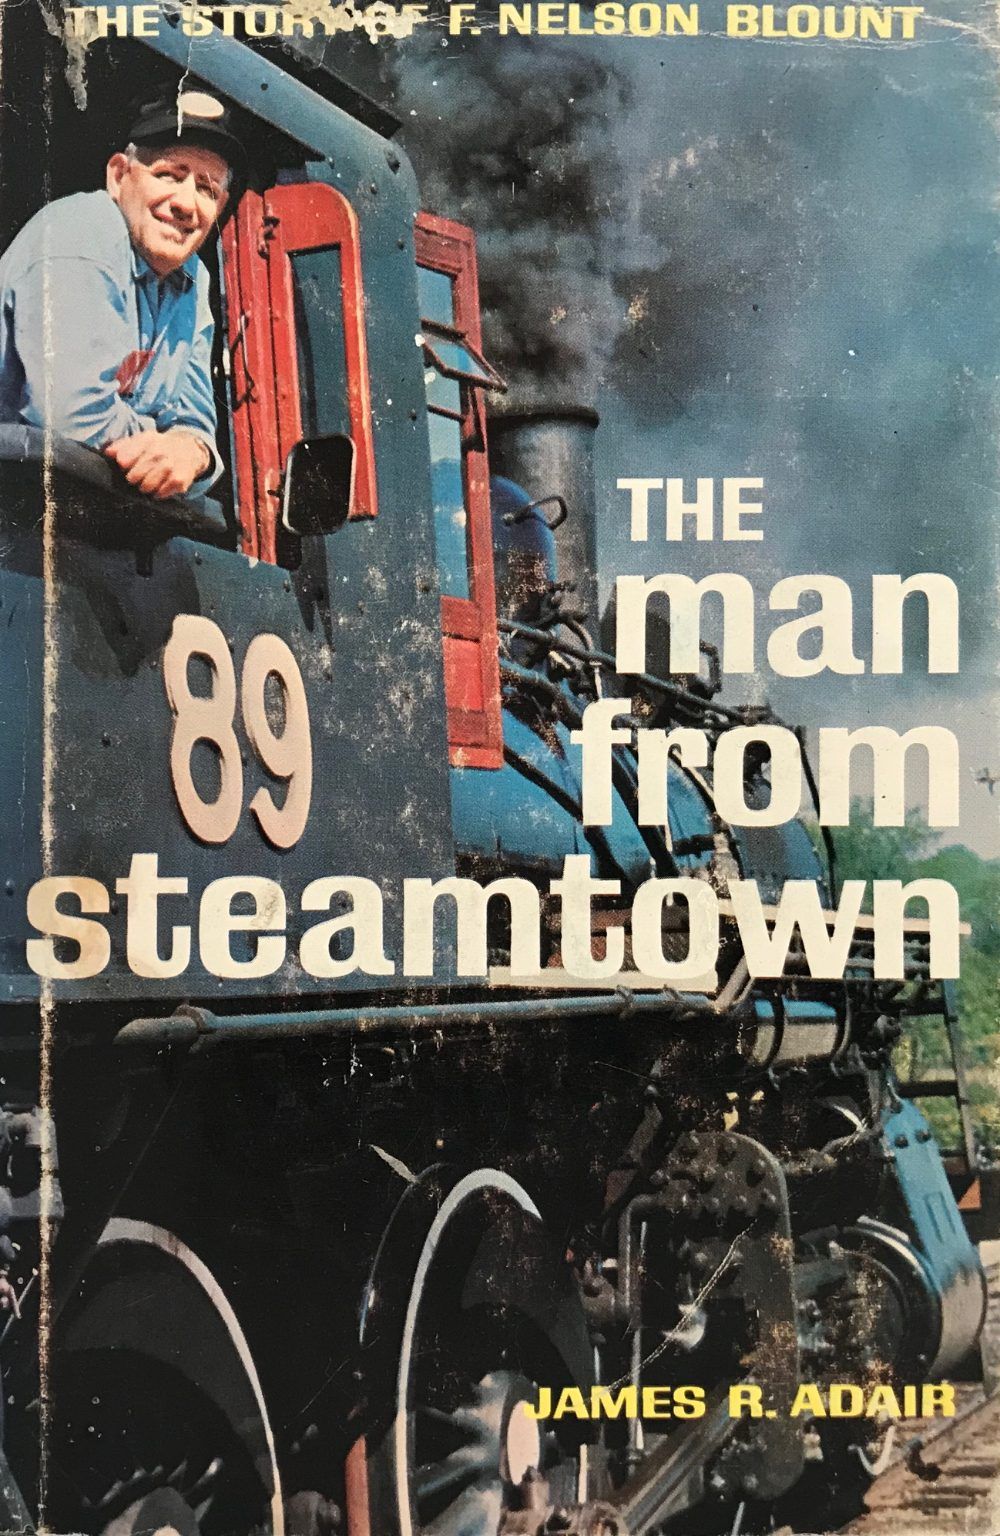 THE MAN FROM STEAMTOWN: The Story of F. Nelson Blount